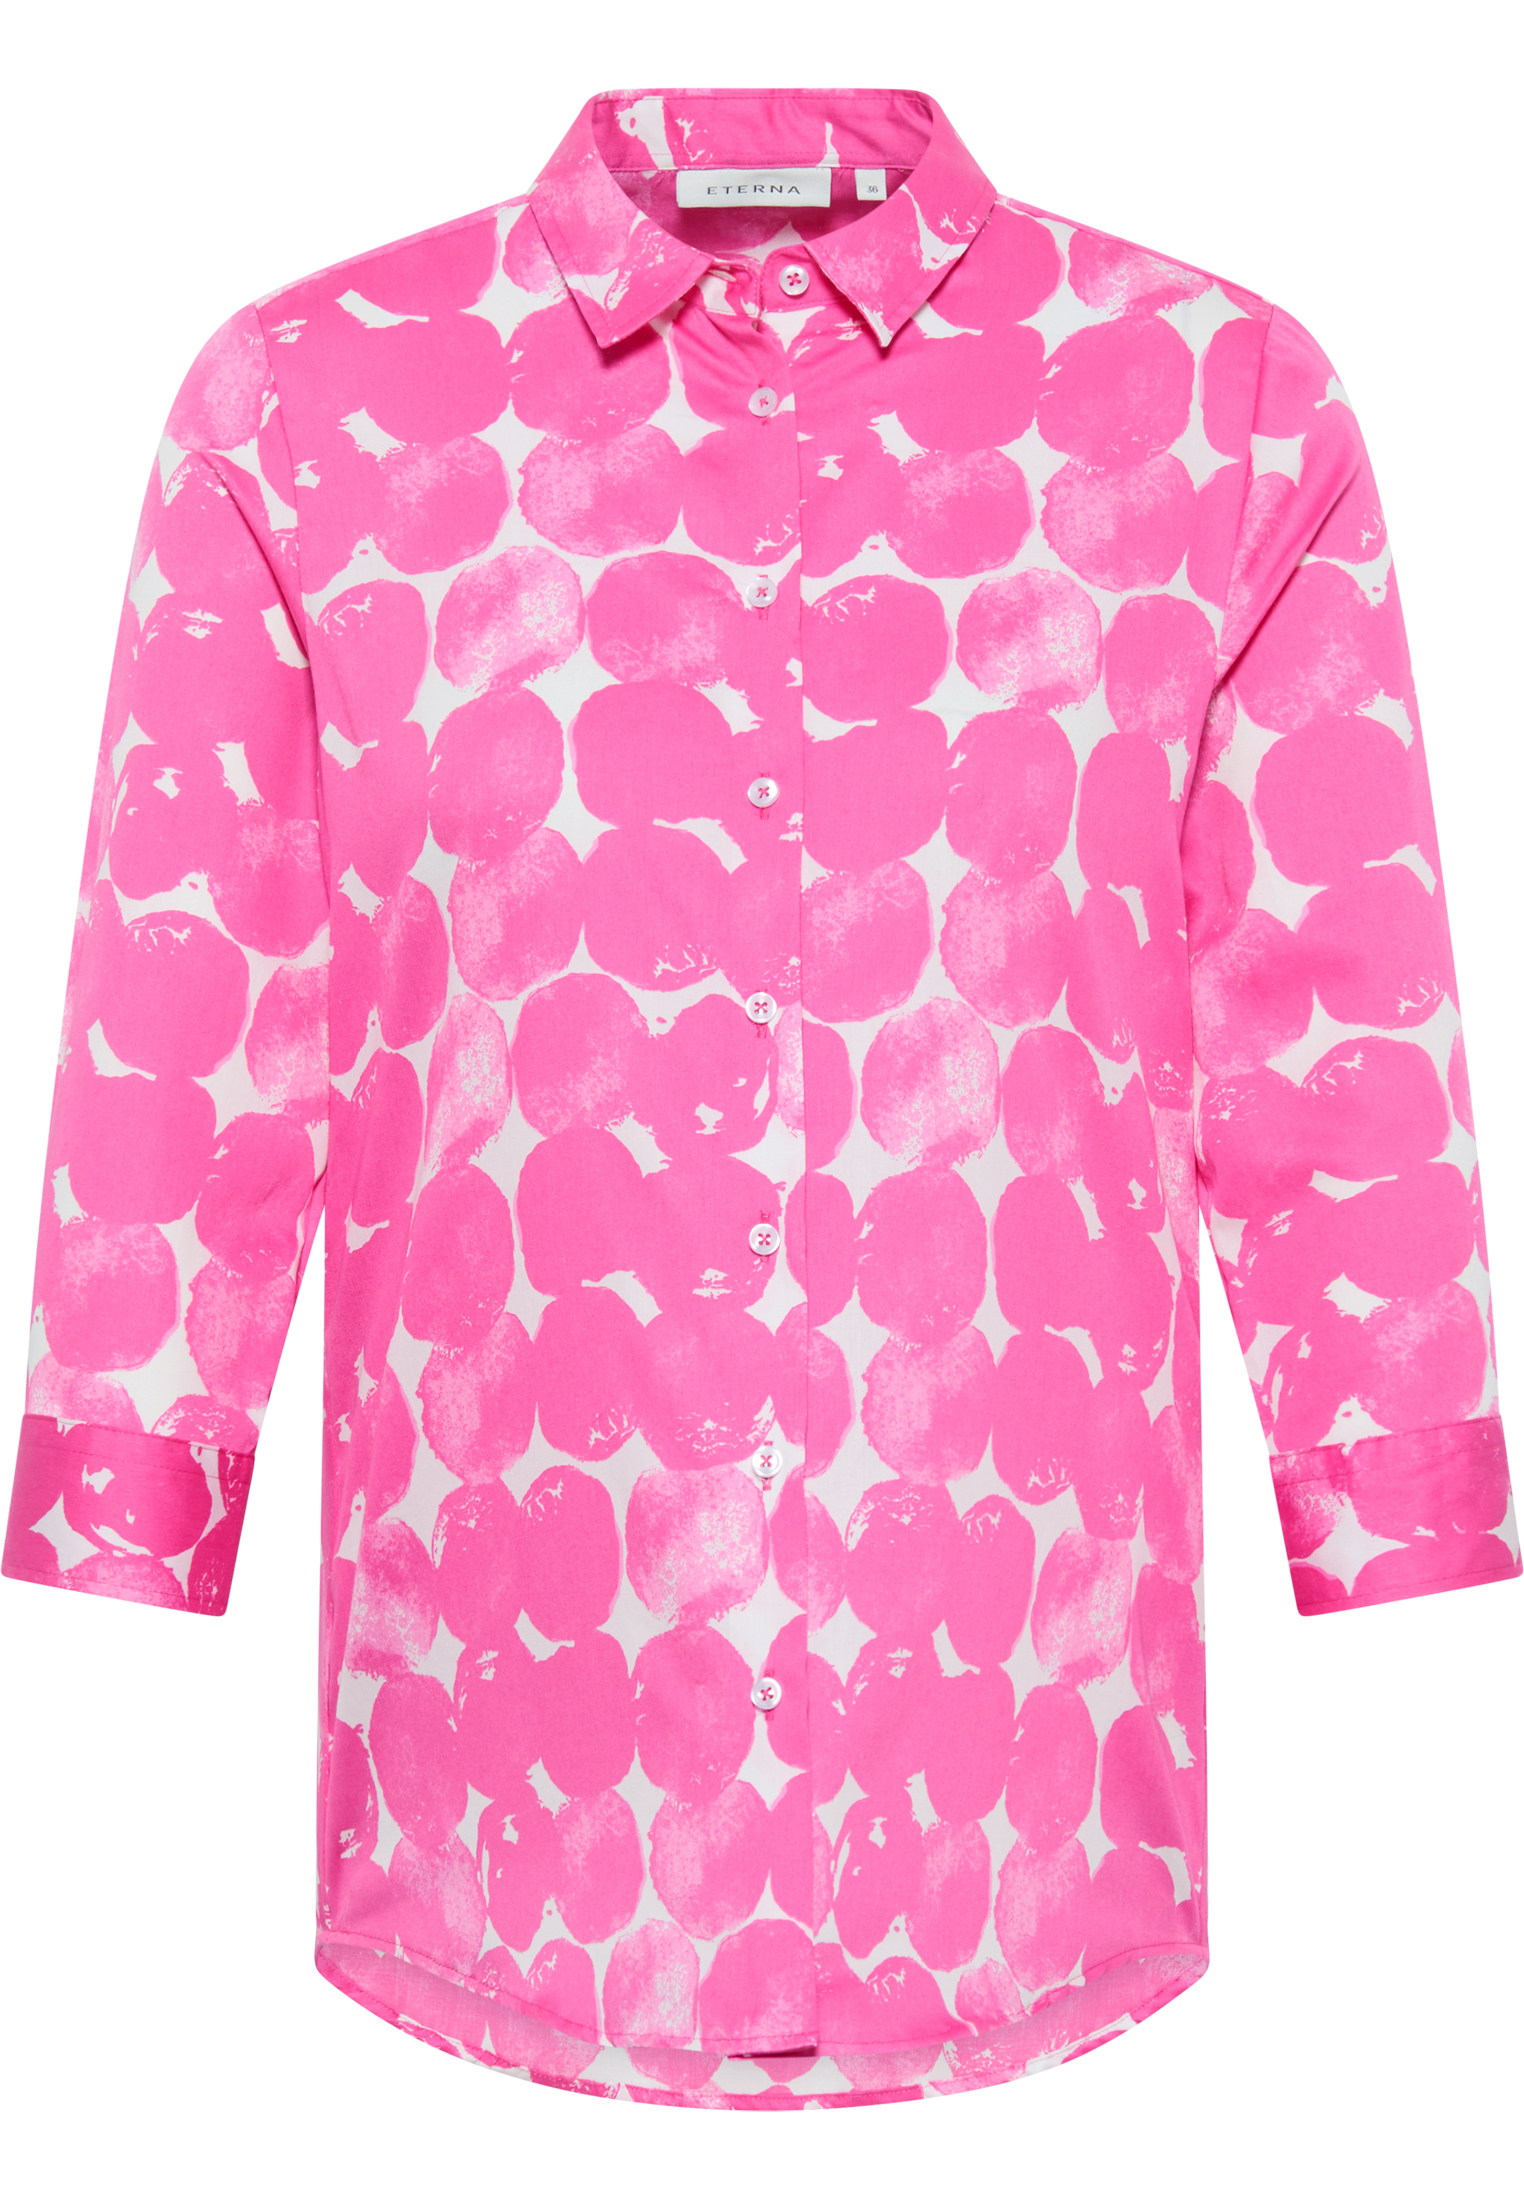 shirt-blouse in pink printed | pink | 50 | 3/4 sleeves |  2BL03949-15-21-50-3/4